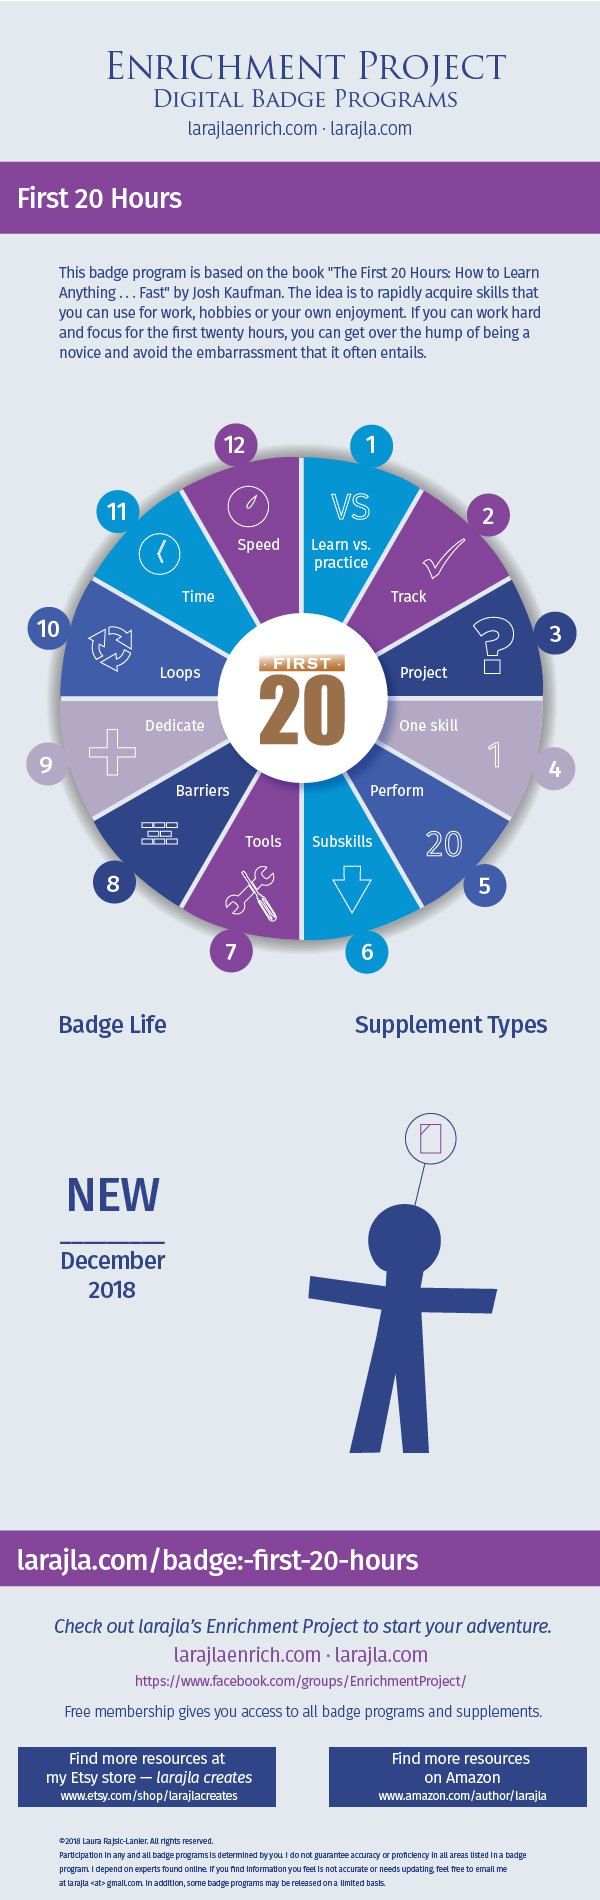 Infographic: First 20 Hours Badge Program